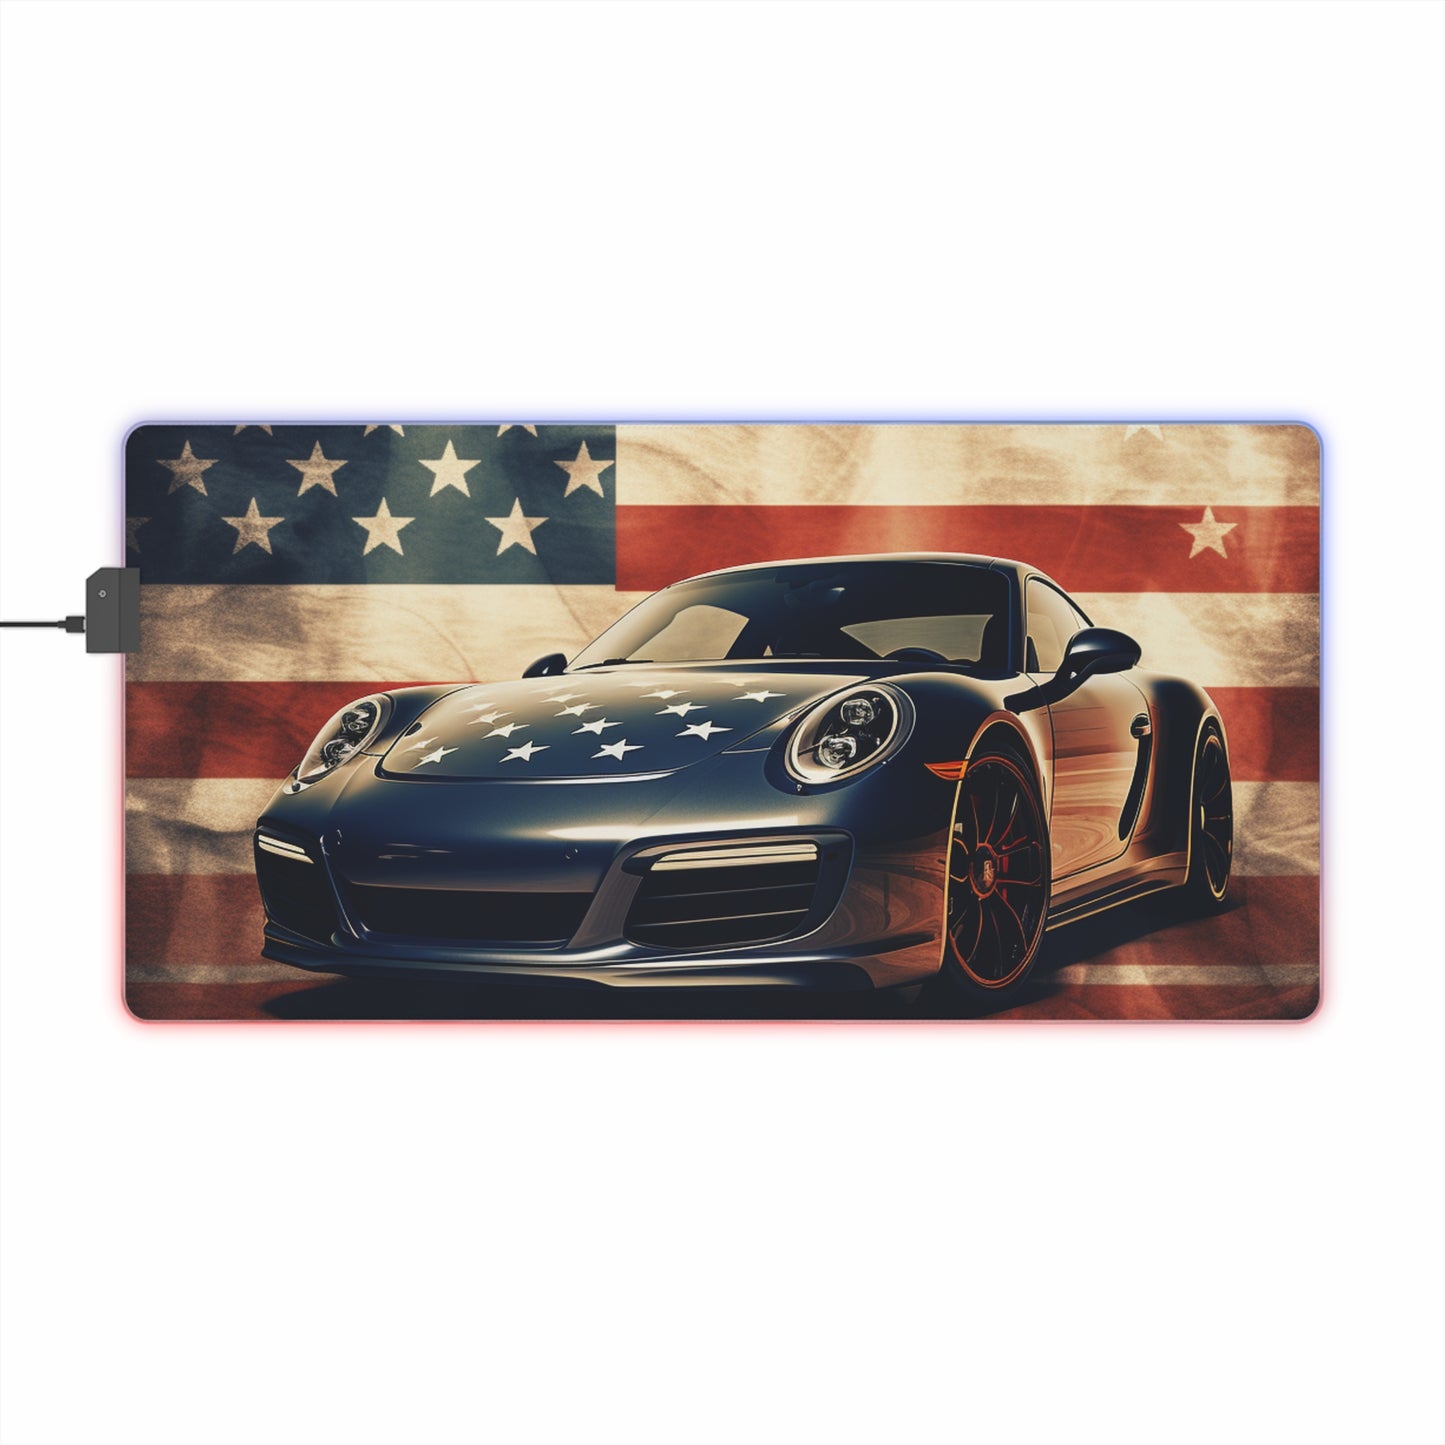 LED Gaming Mouse Pad Abstract American Flag Background Porsche 3